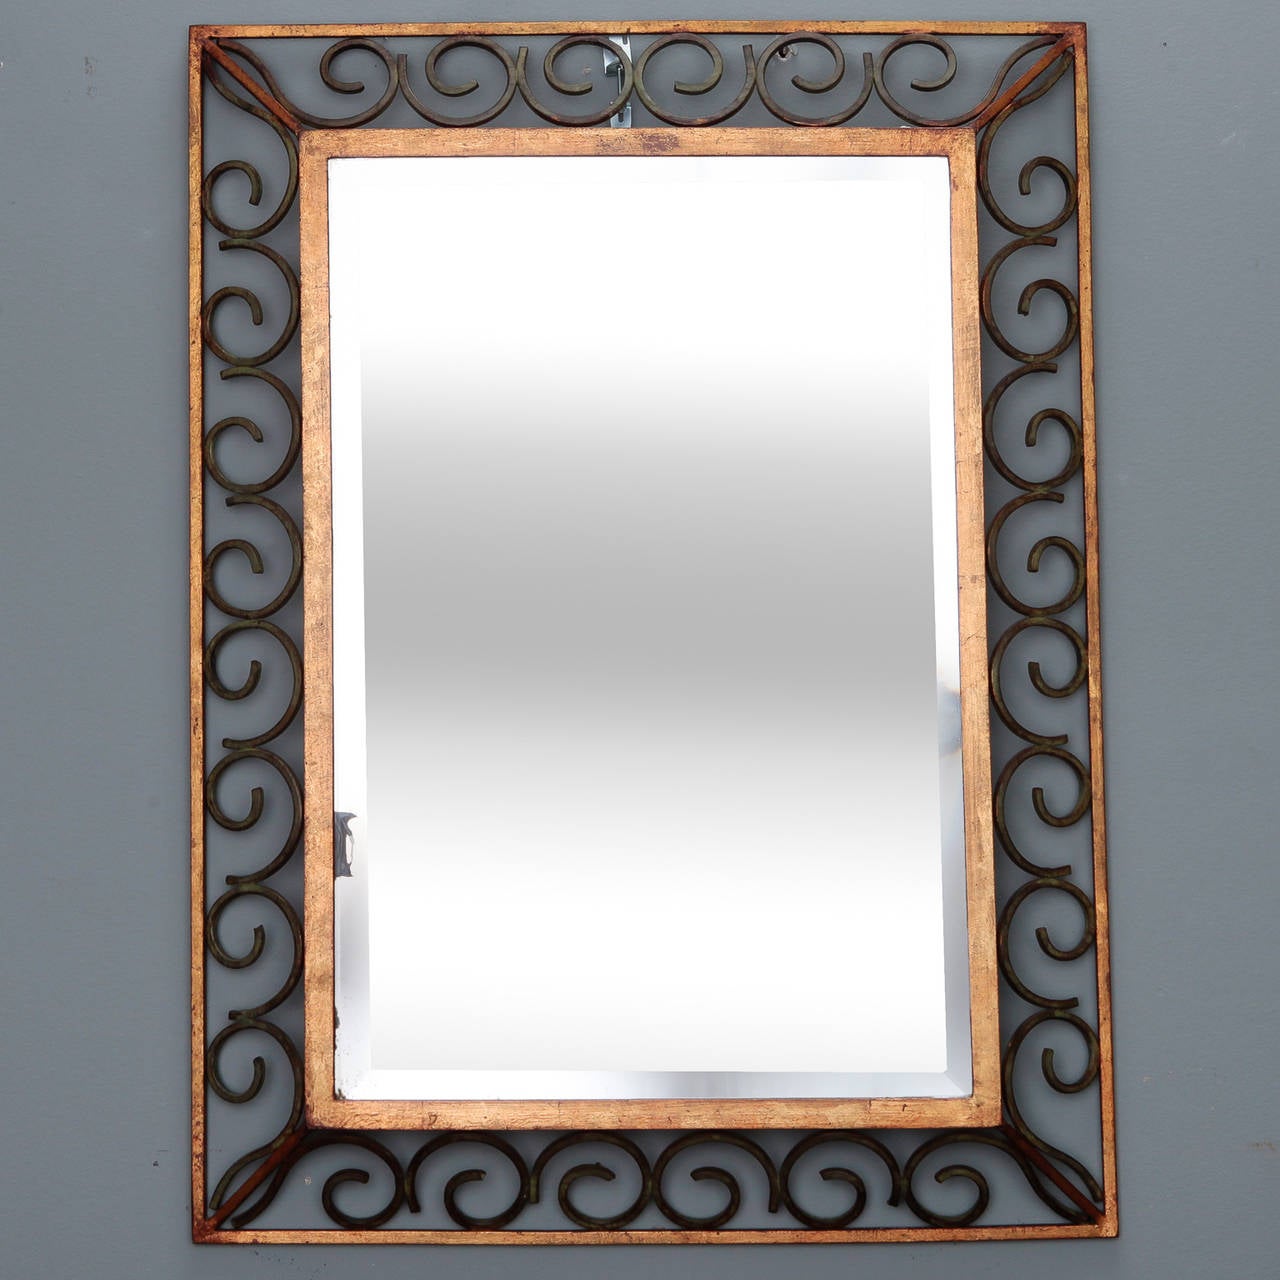 Rectangular beveled edge mirror with open work scroll frame in gilded and green painted iron, circa 1930s. Actual mirror size: 24.75” H x 16.5” W.